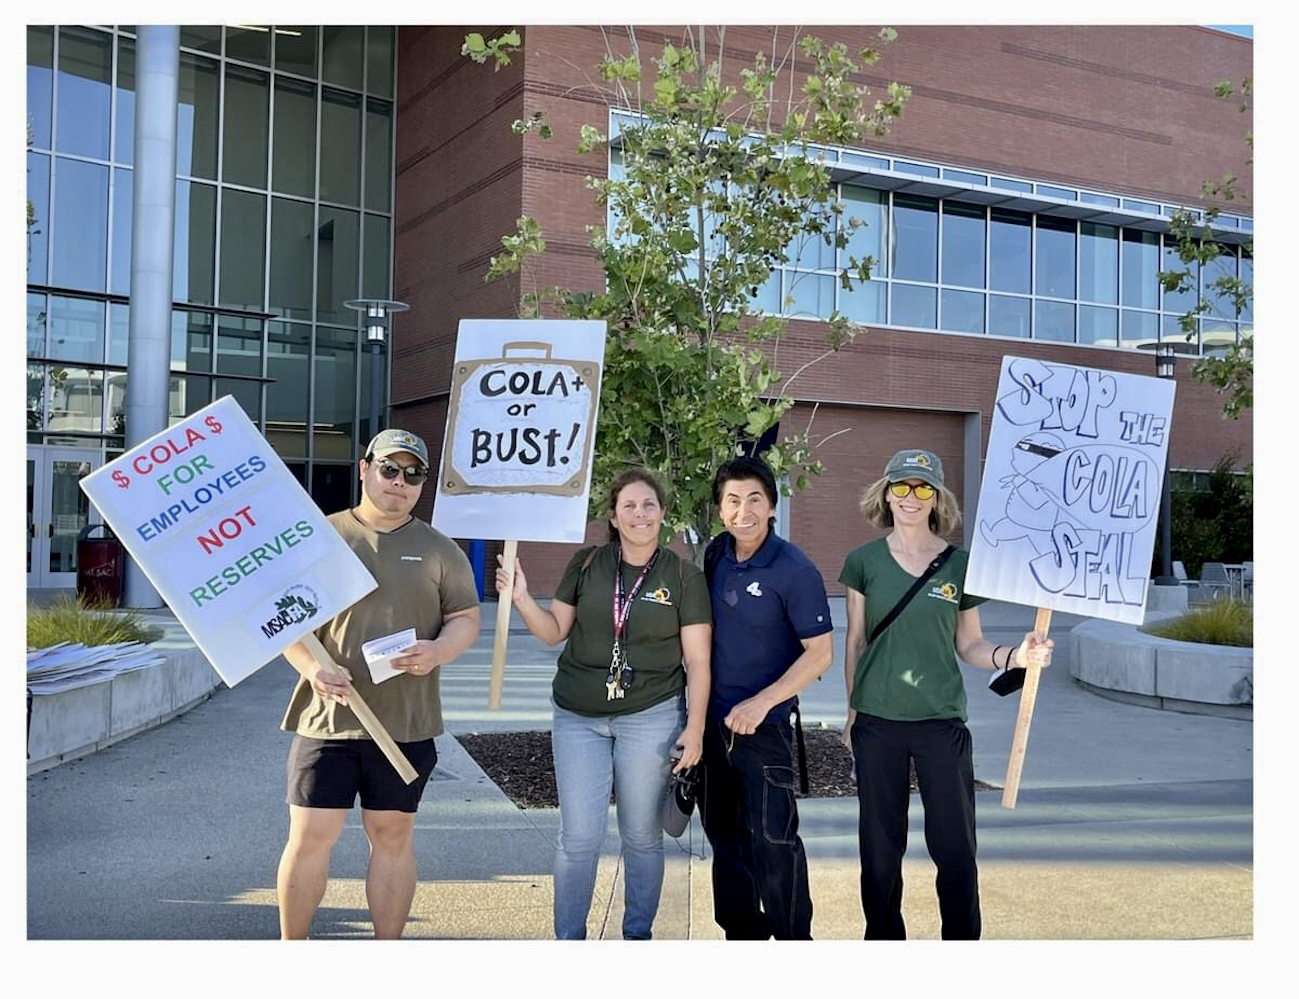 Faculty Association Members protesting in support of the FA Negotiations Team